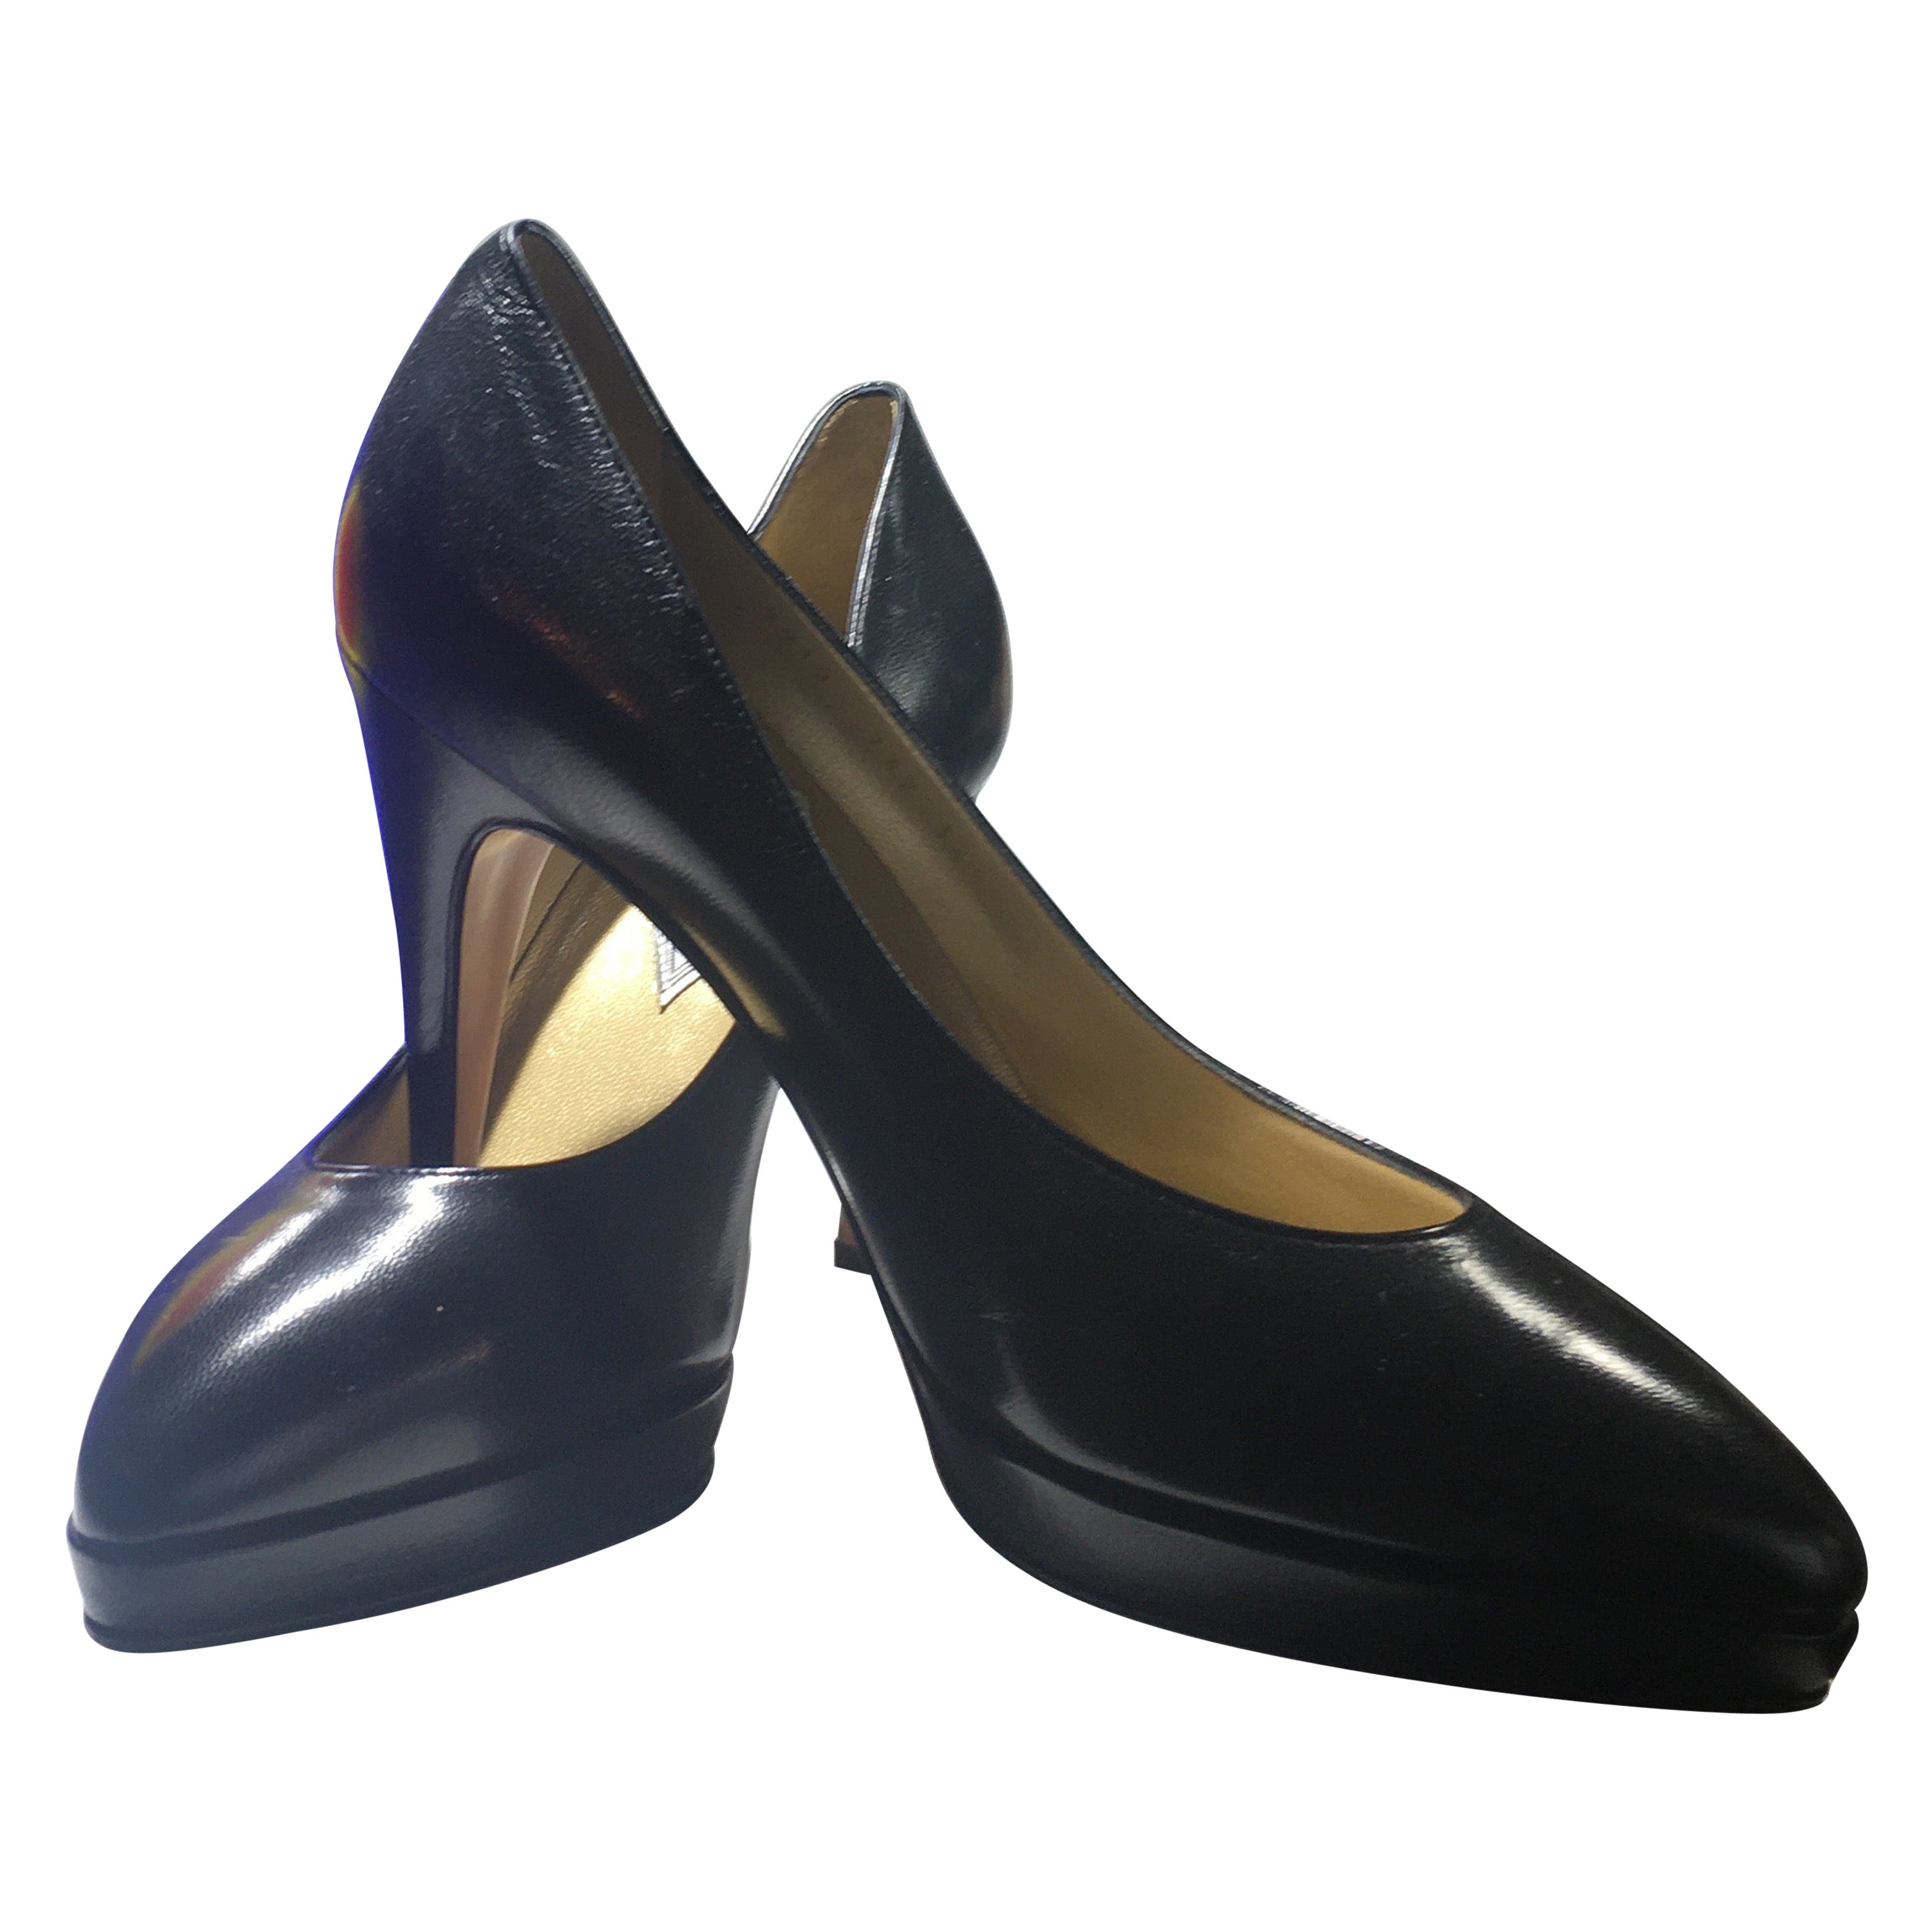 Atelier Versace Black Satin High Heels, Never Worn Size 7 For Sale at ...